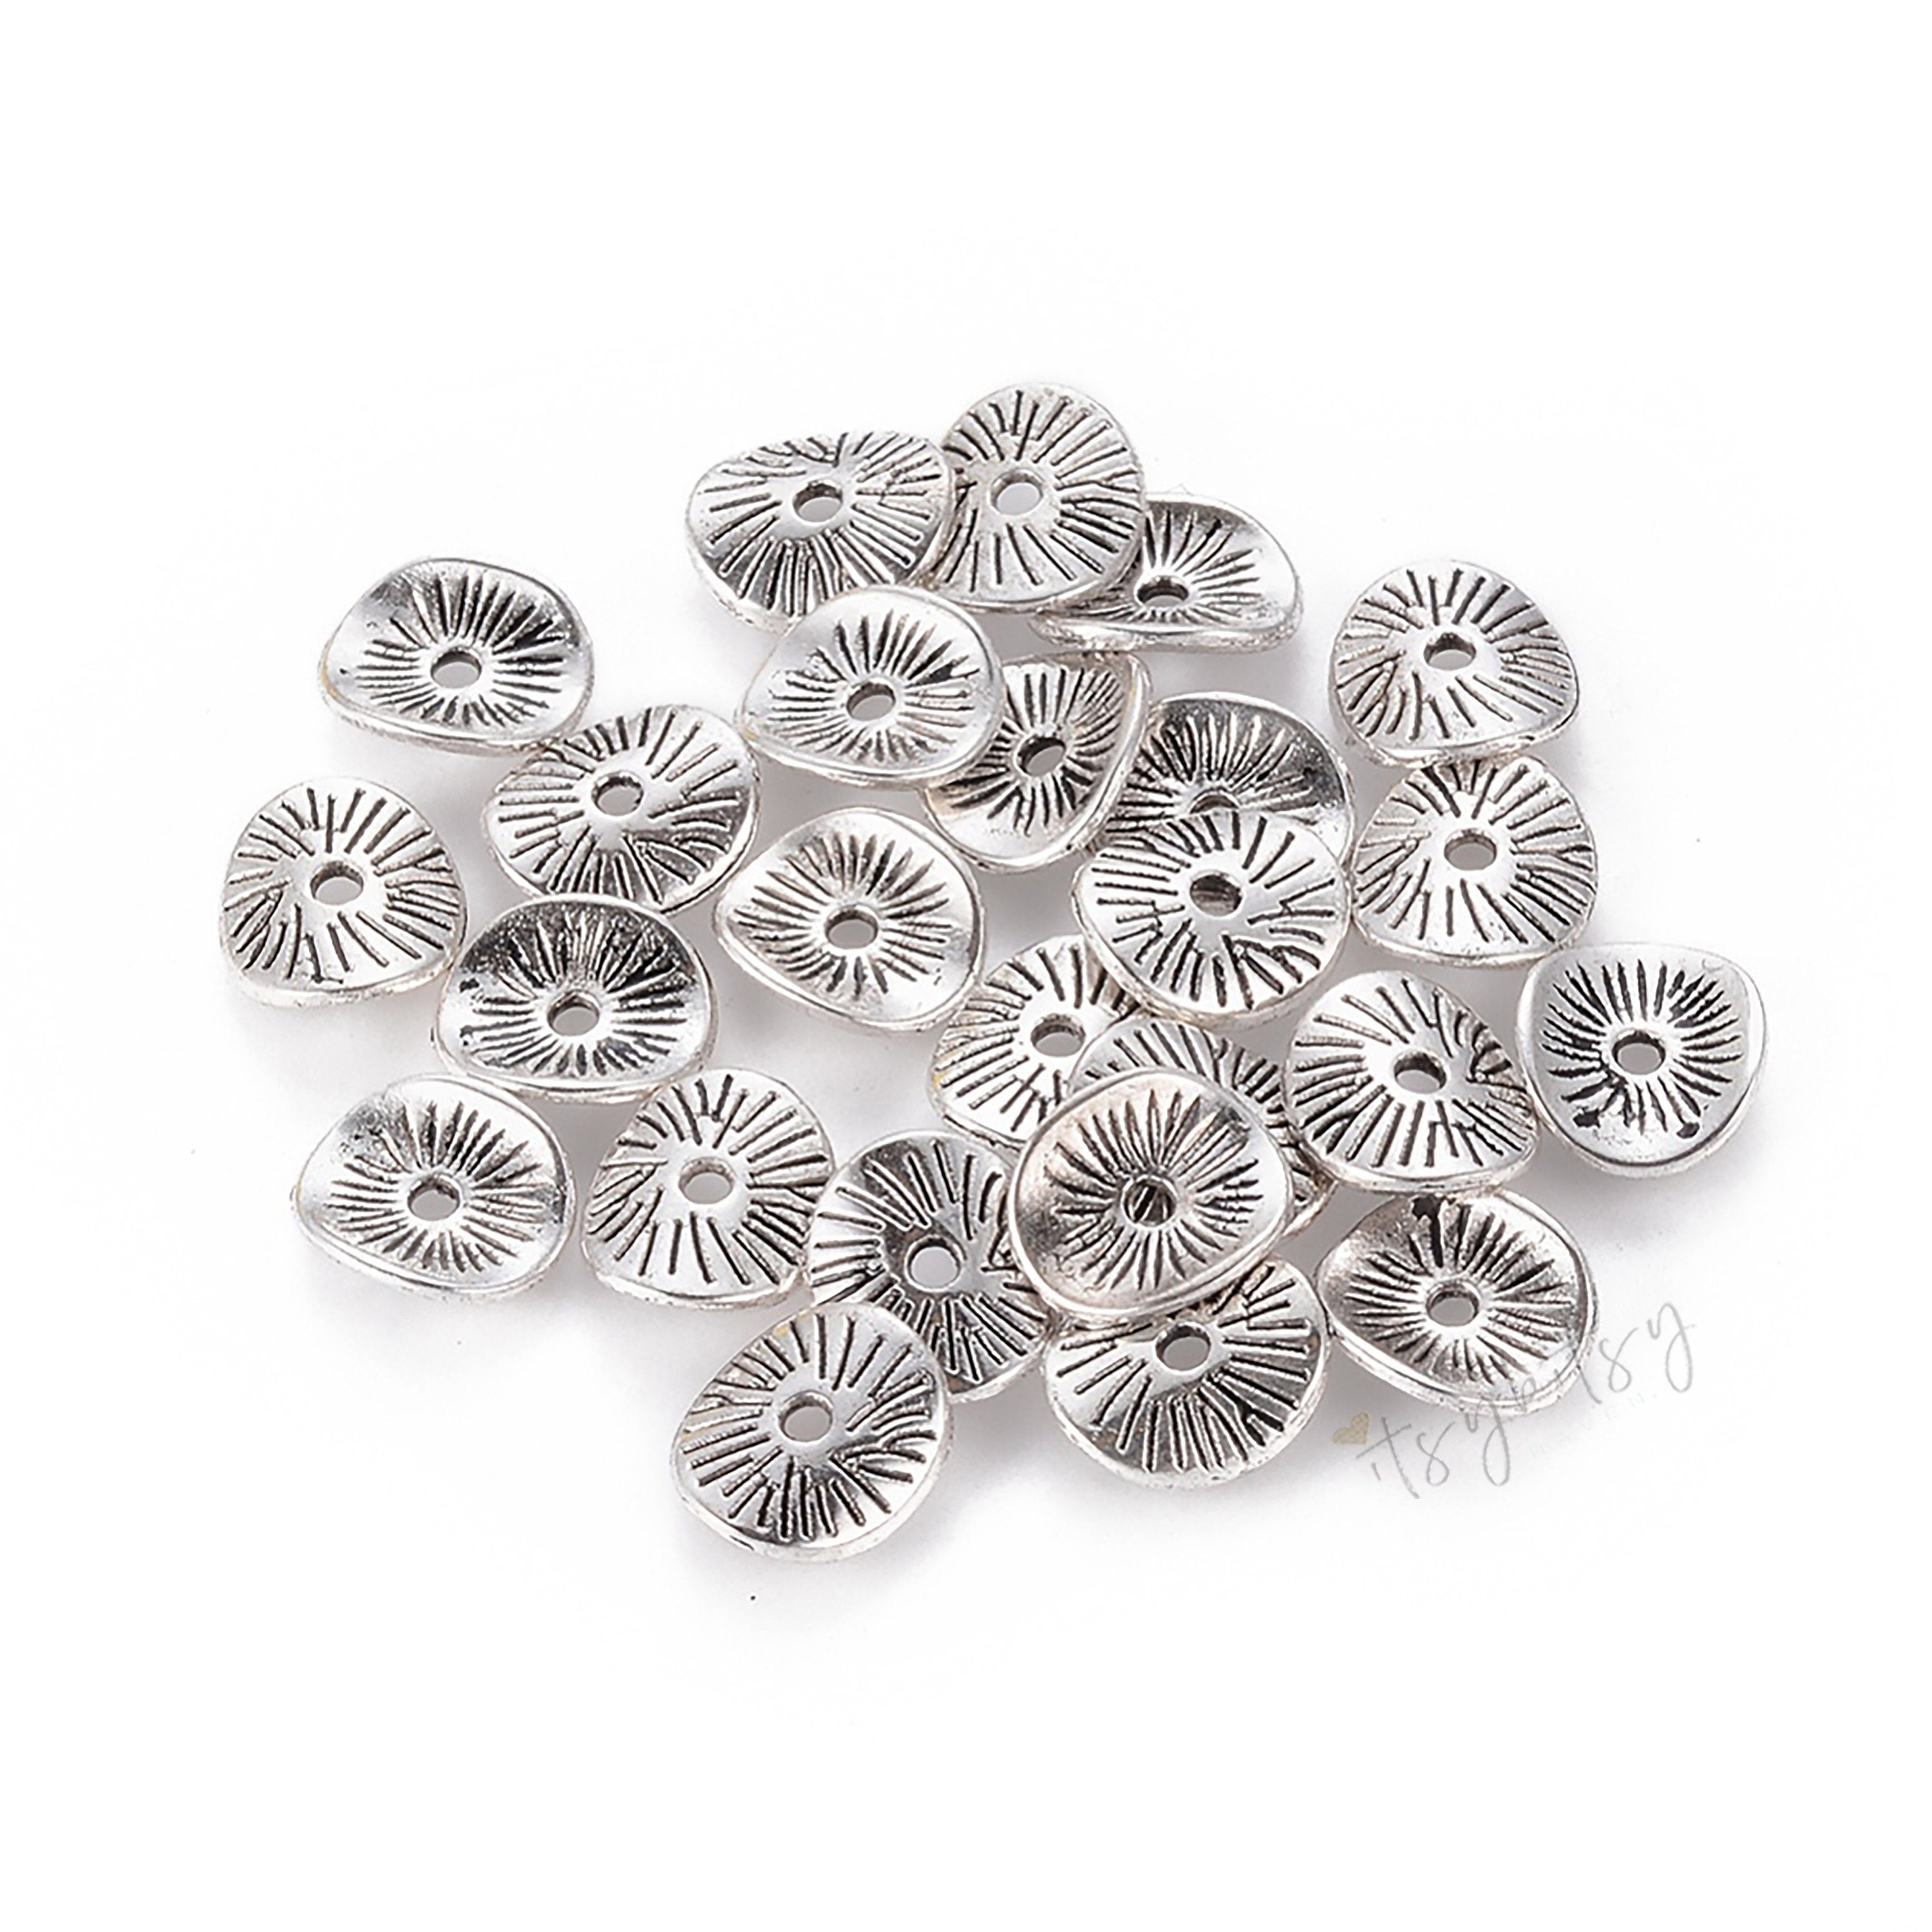 50pcs, 9.5x8.5mm, Zinc Alloy Nickel Free Round Bead Spacer Bead Separator Heishi Spacer in Antique Silver